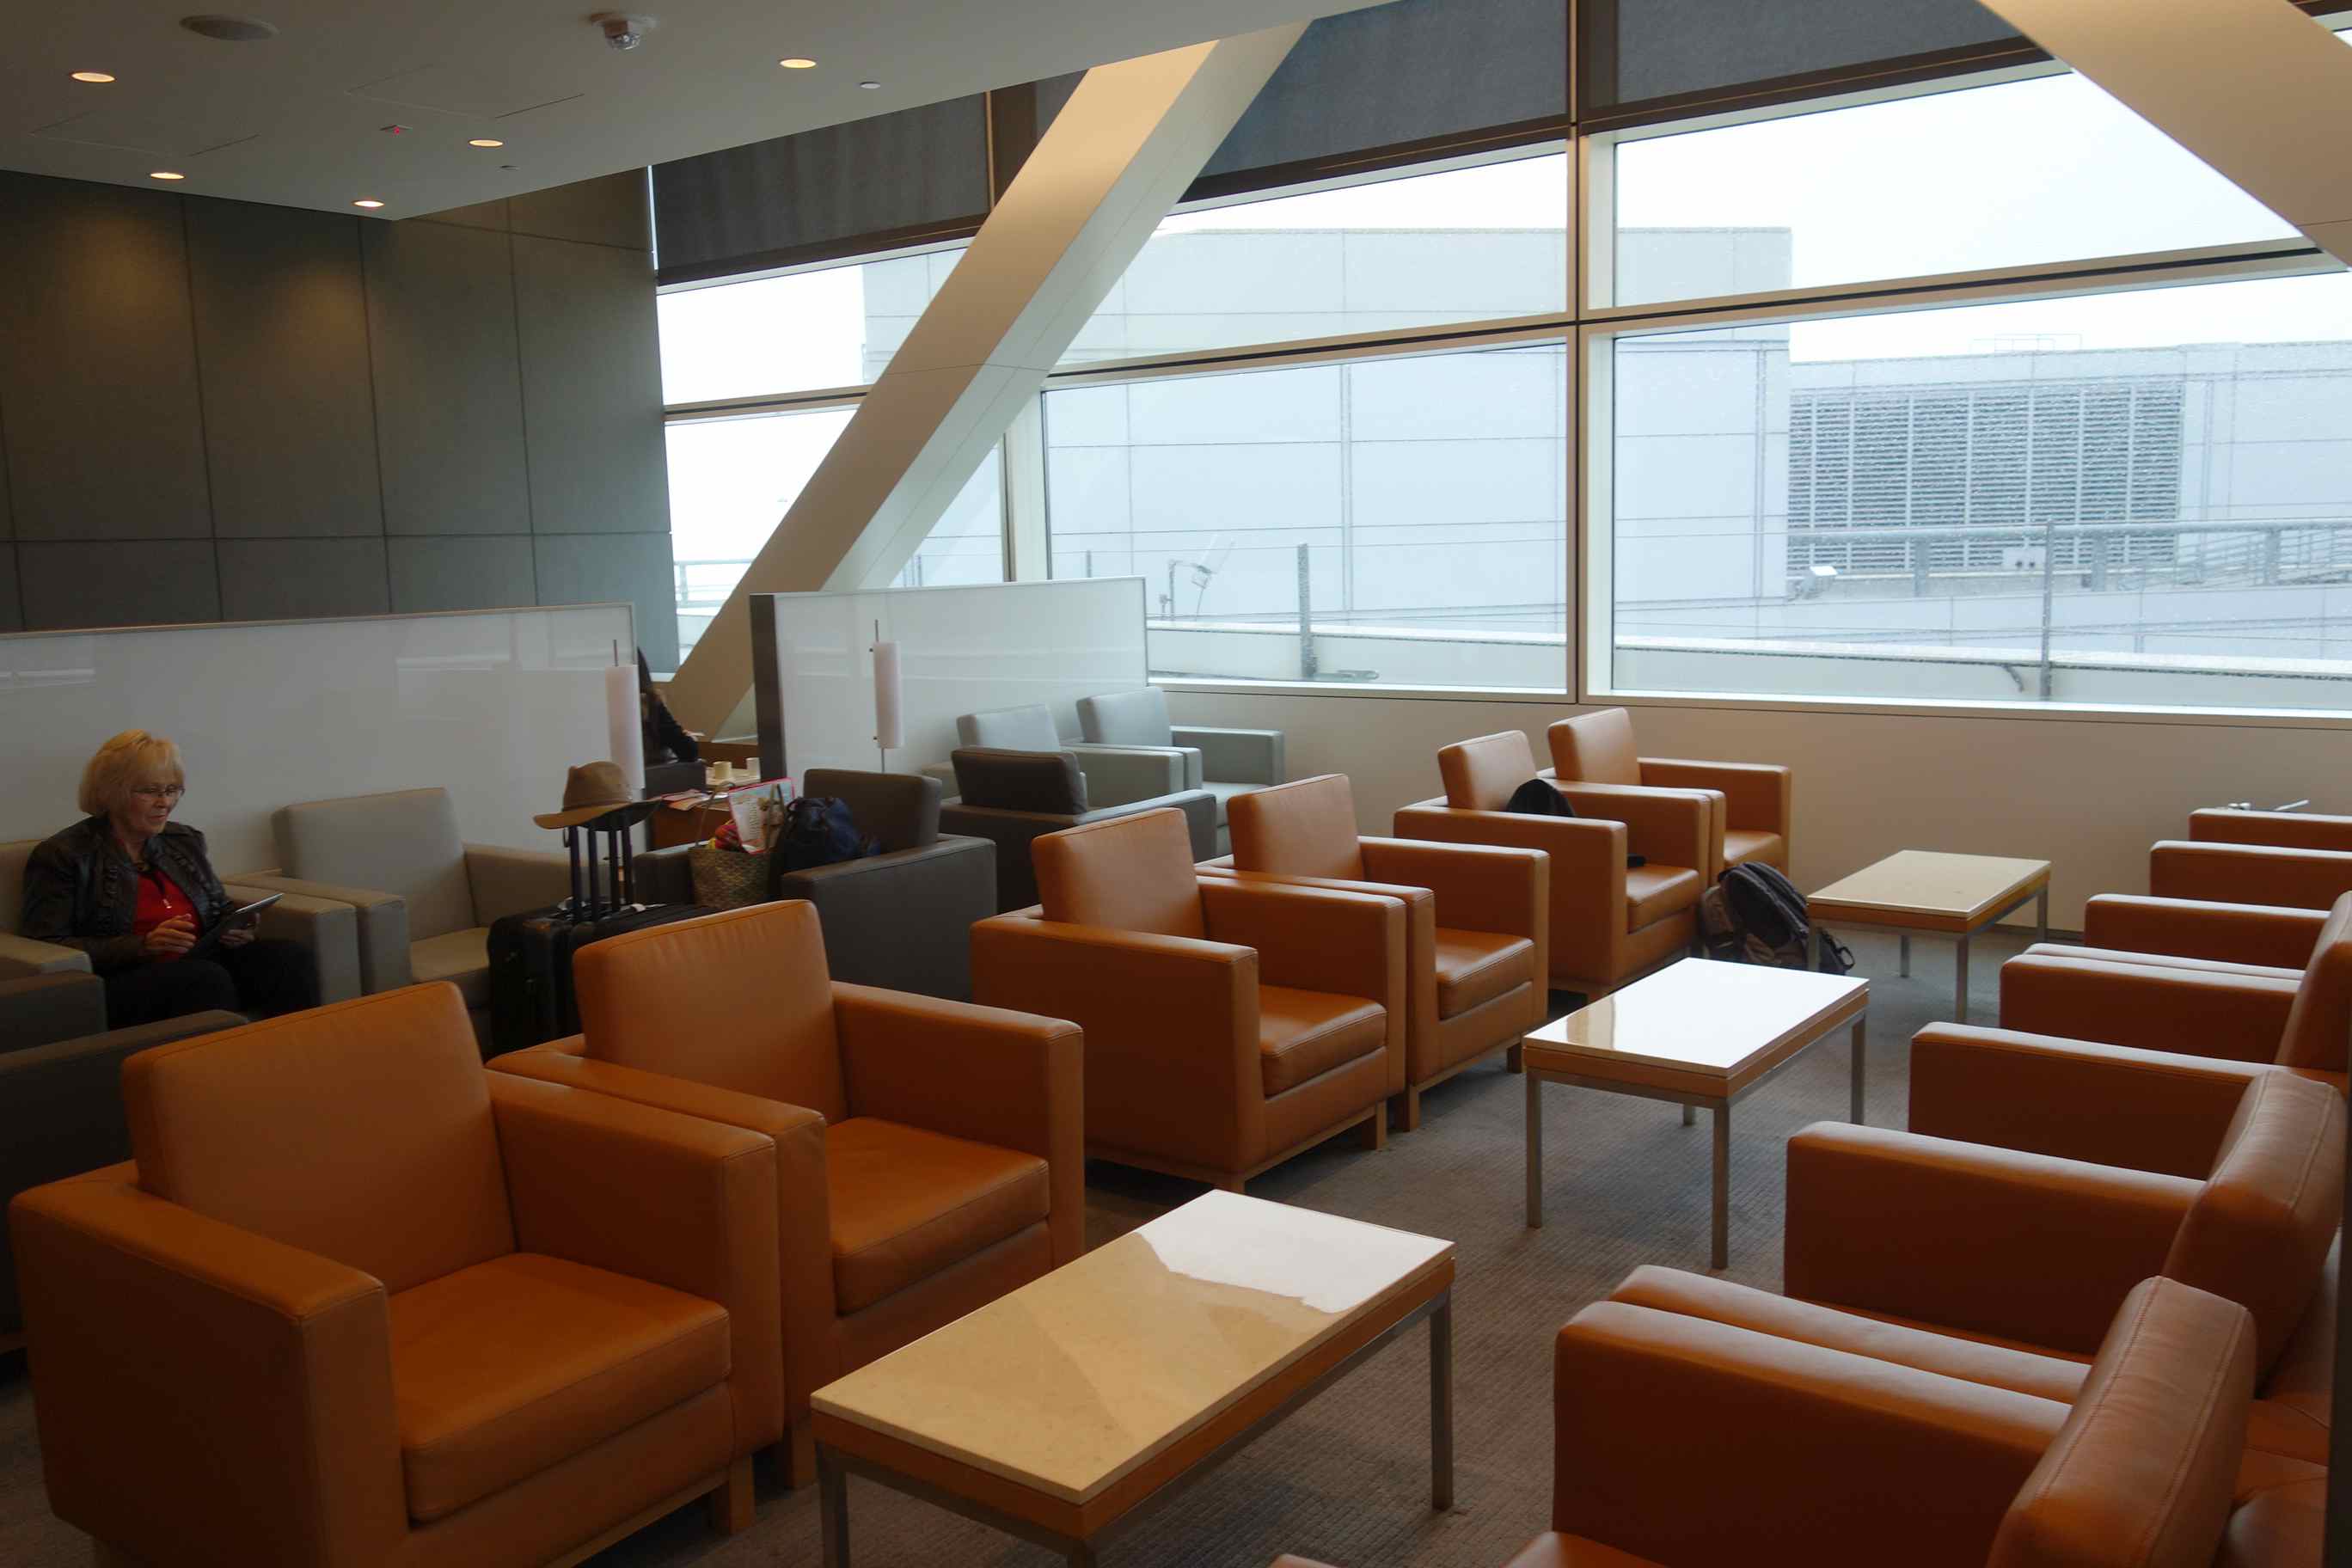 Seating in the lounge